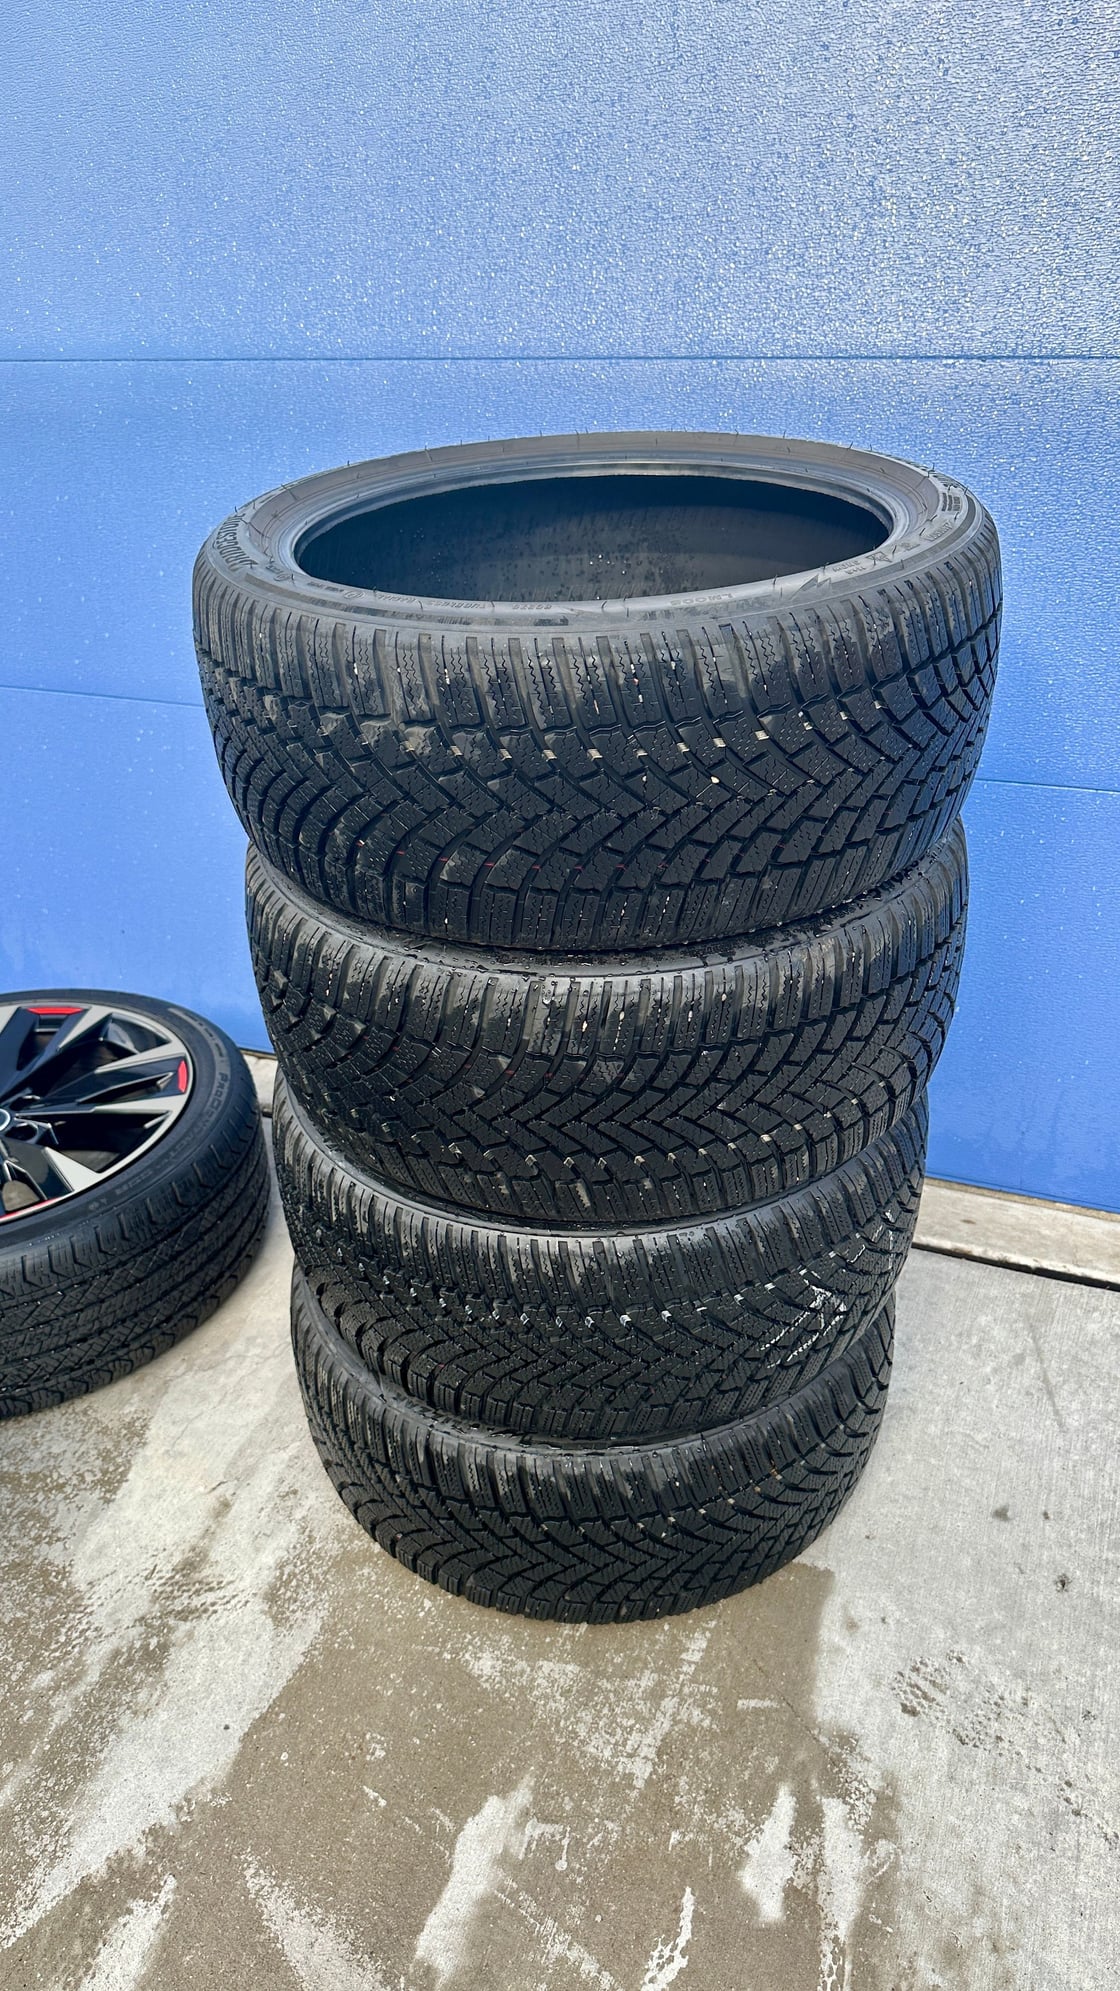 Wheels and Tires/Axles - FS: Like-New 18” Audi Wheels with All-Season and Winter Tires - Used - 2022 to 2024 Audi S3 - 2021 to 2024 Audi A3 - 2021 to 2024 Volkswagen Golf R - Denver, CO 80212, United States